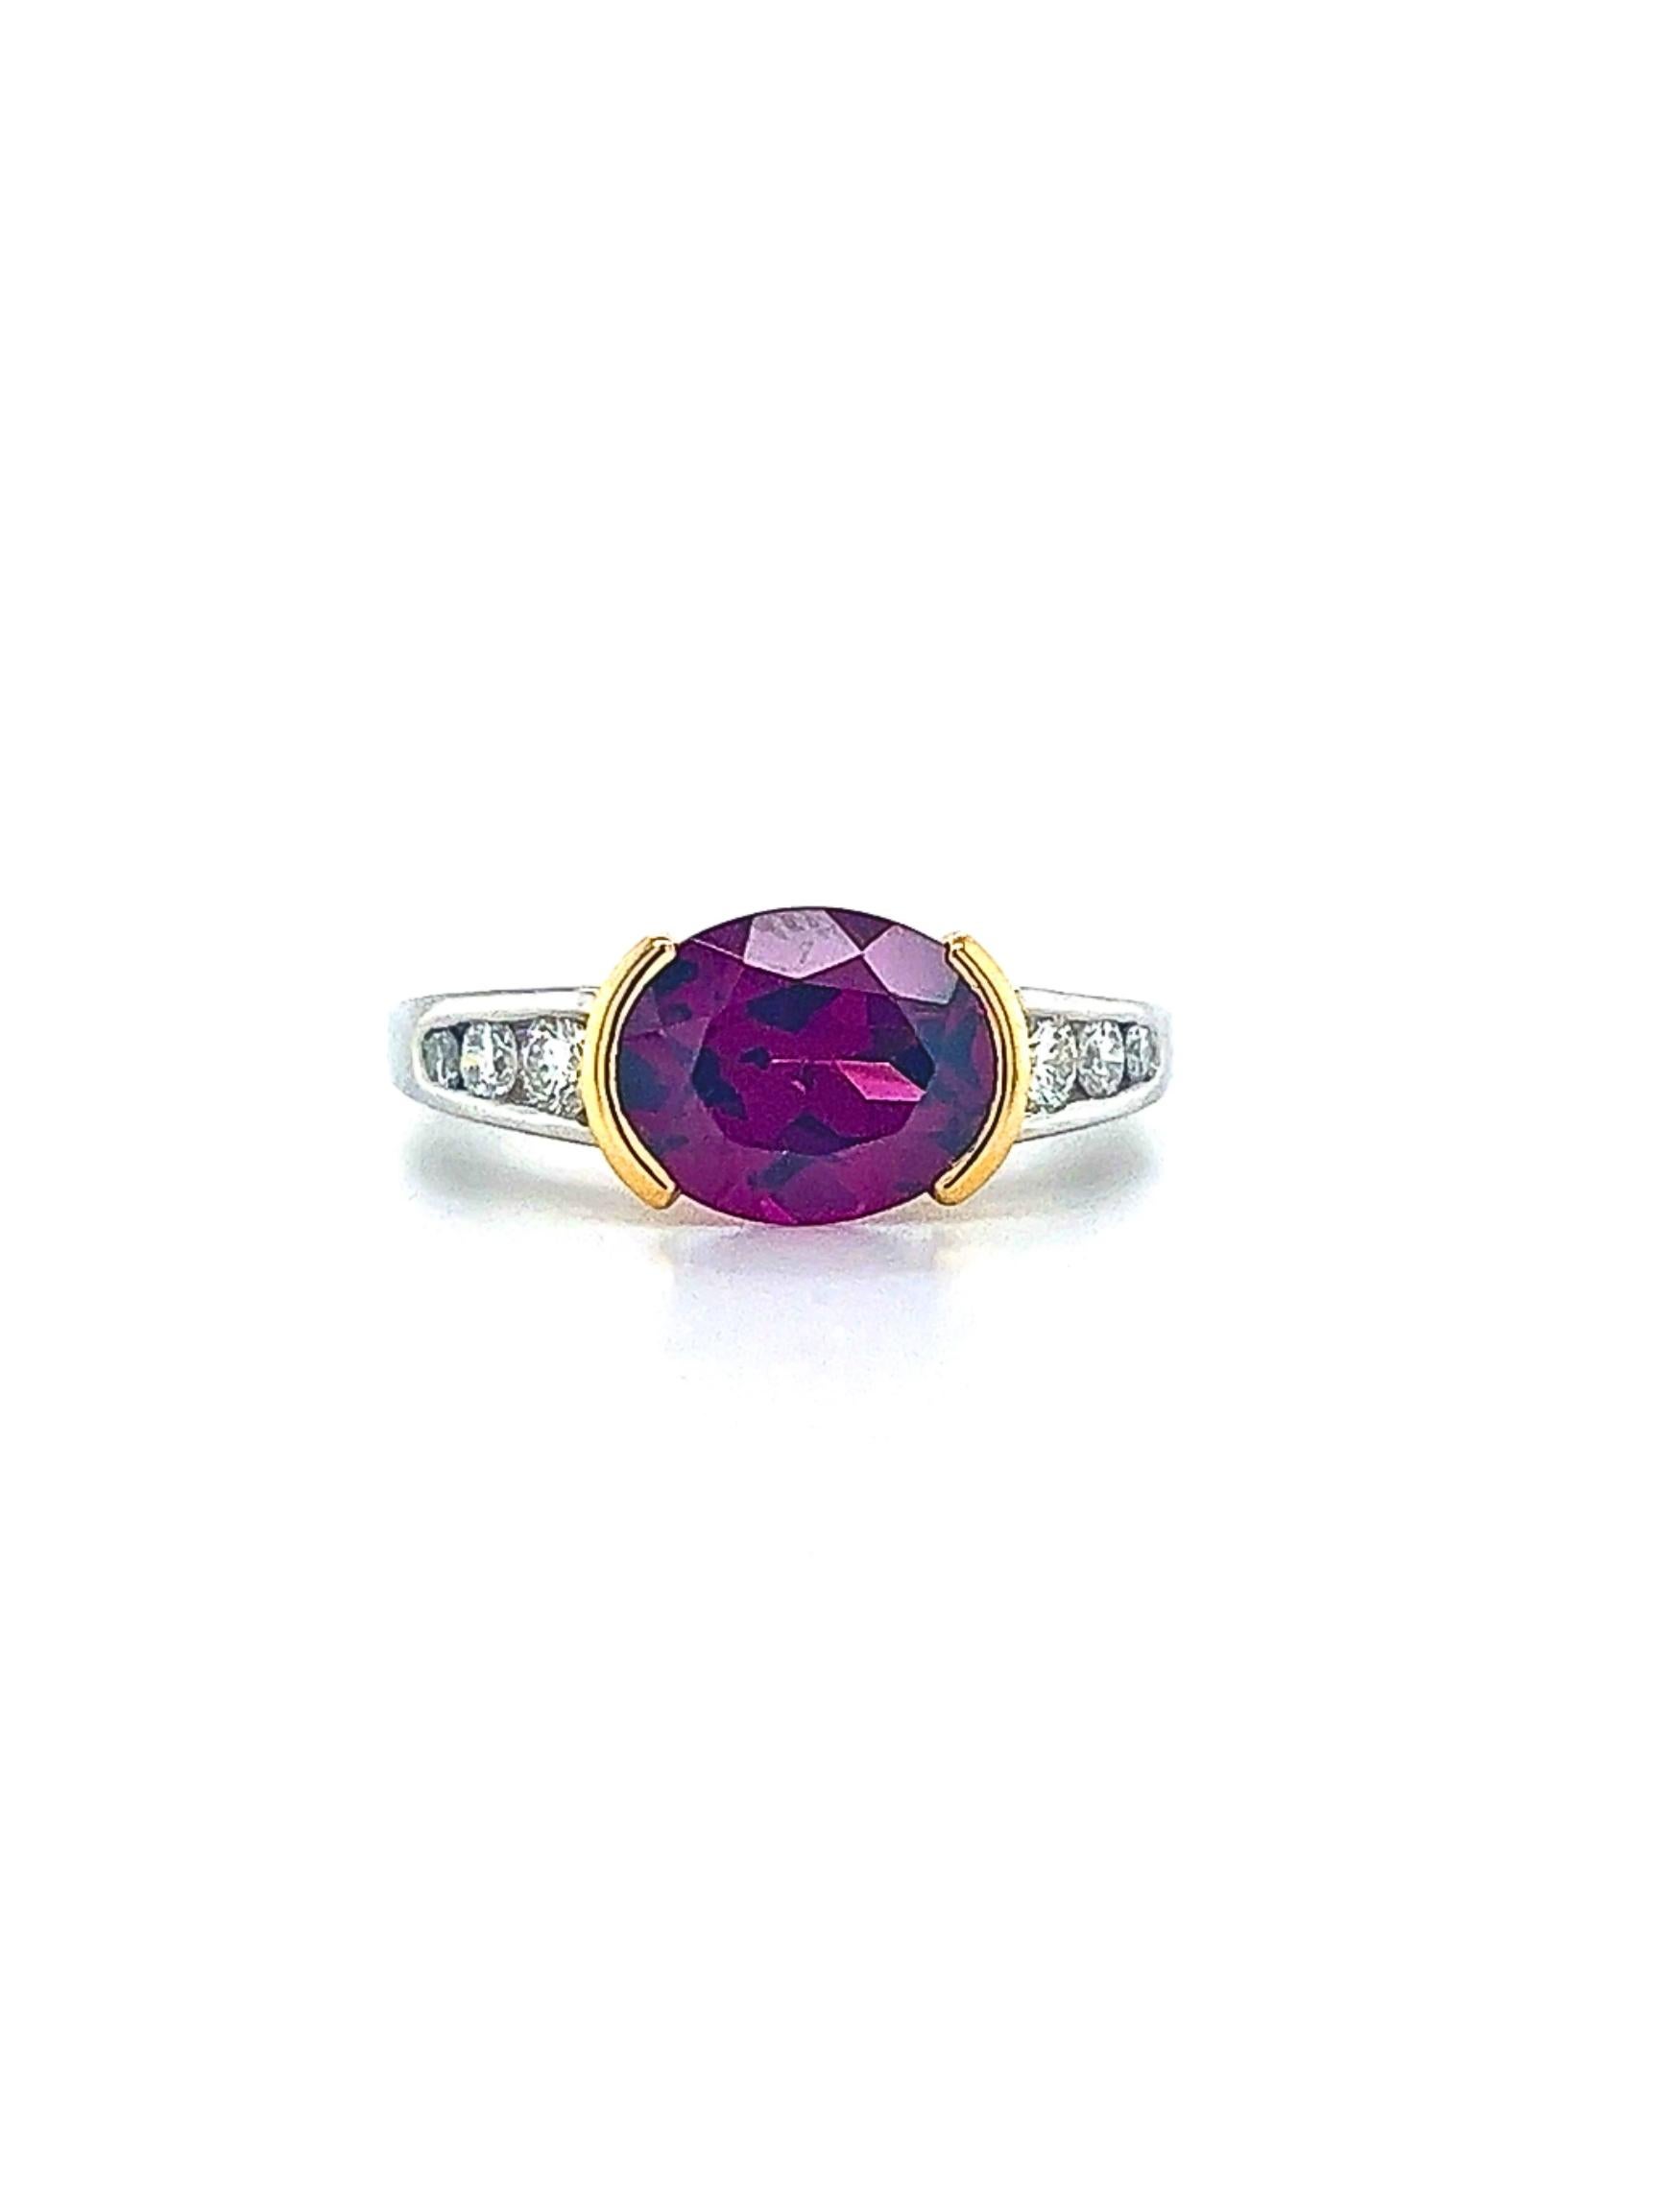 Art Deco 3.50 Carat Red Rubellite Tourmaline East West Ring in Platinum and 18K Gold For Sale